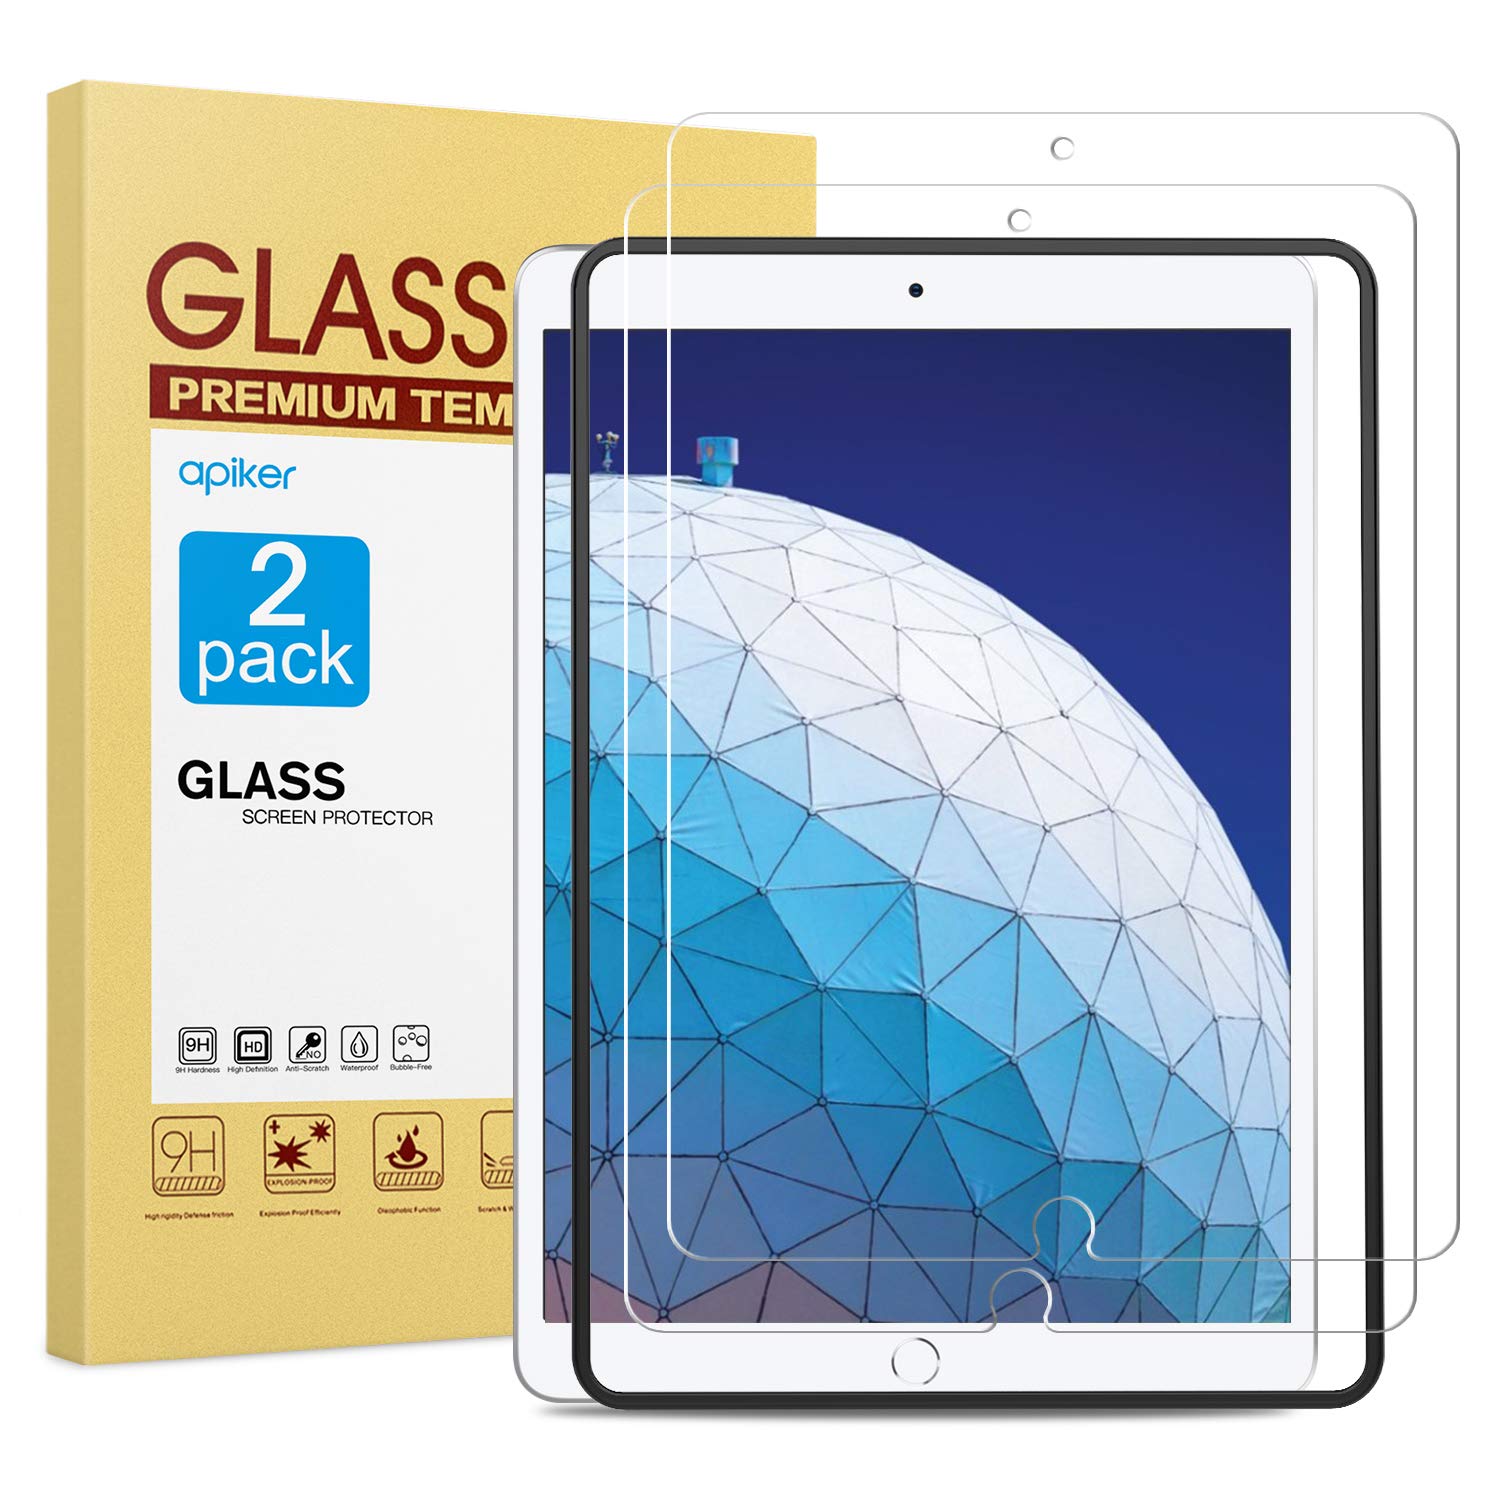 [2 Pack] Screen Protector for iPad Air 3 2019 / iPad Pro 10.5 Inch, apiker Tempered Glass Screen Protector with [Alignment Frame] [Apple Pencil Compatible]